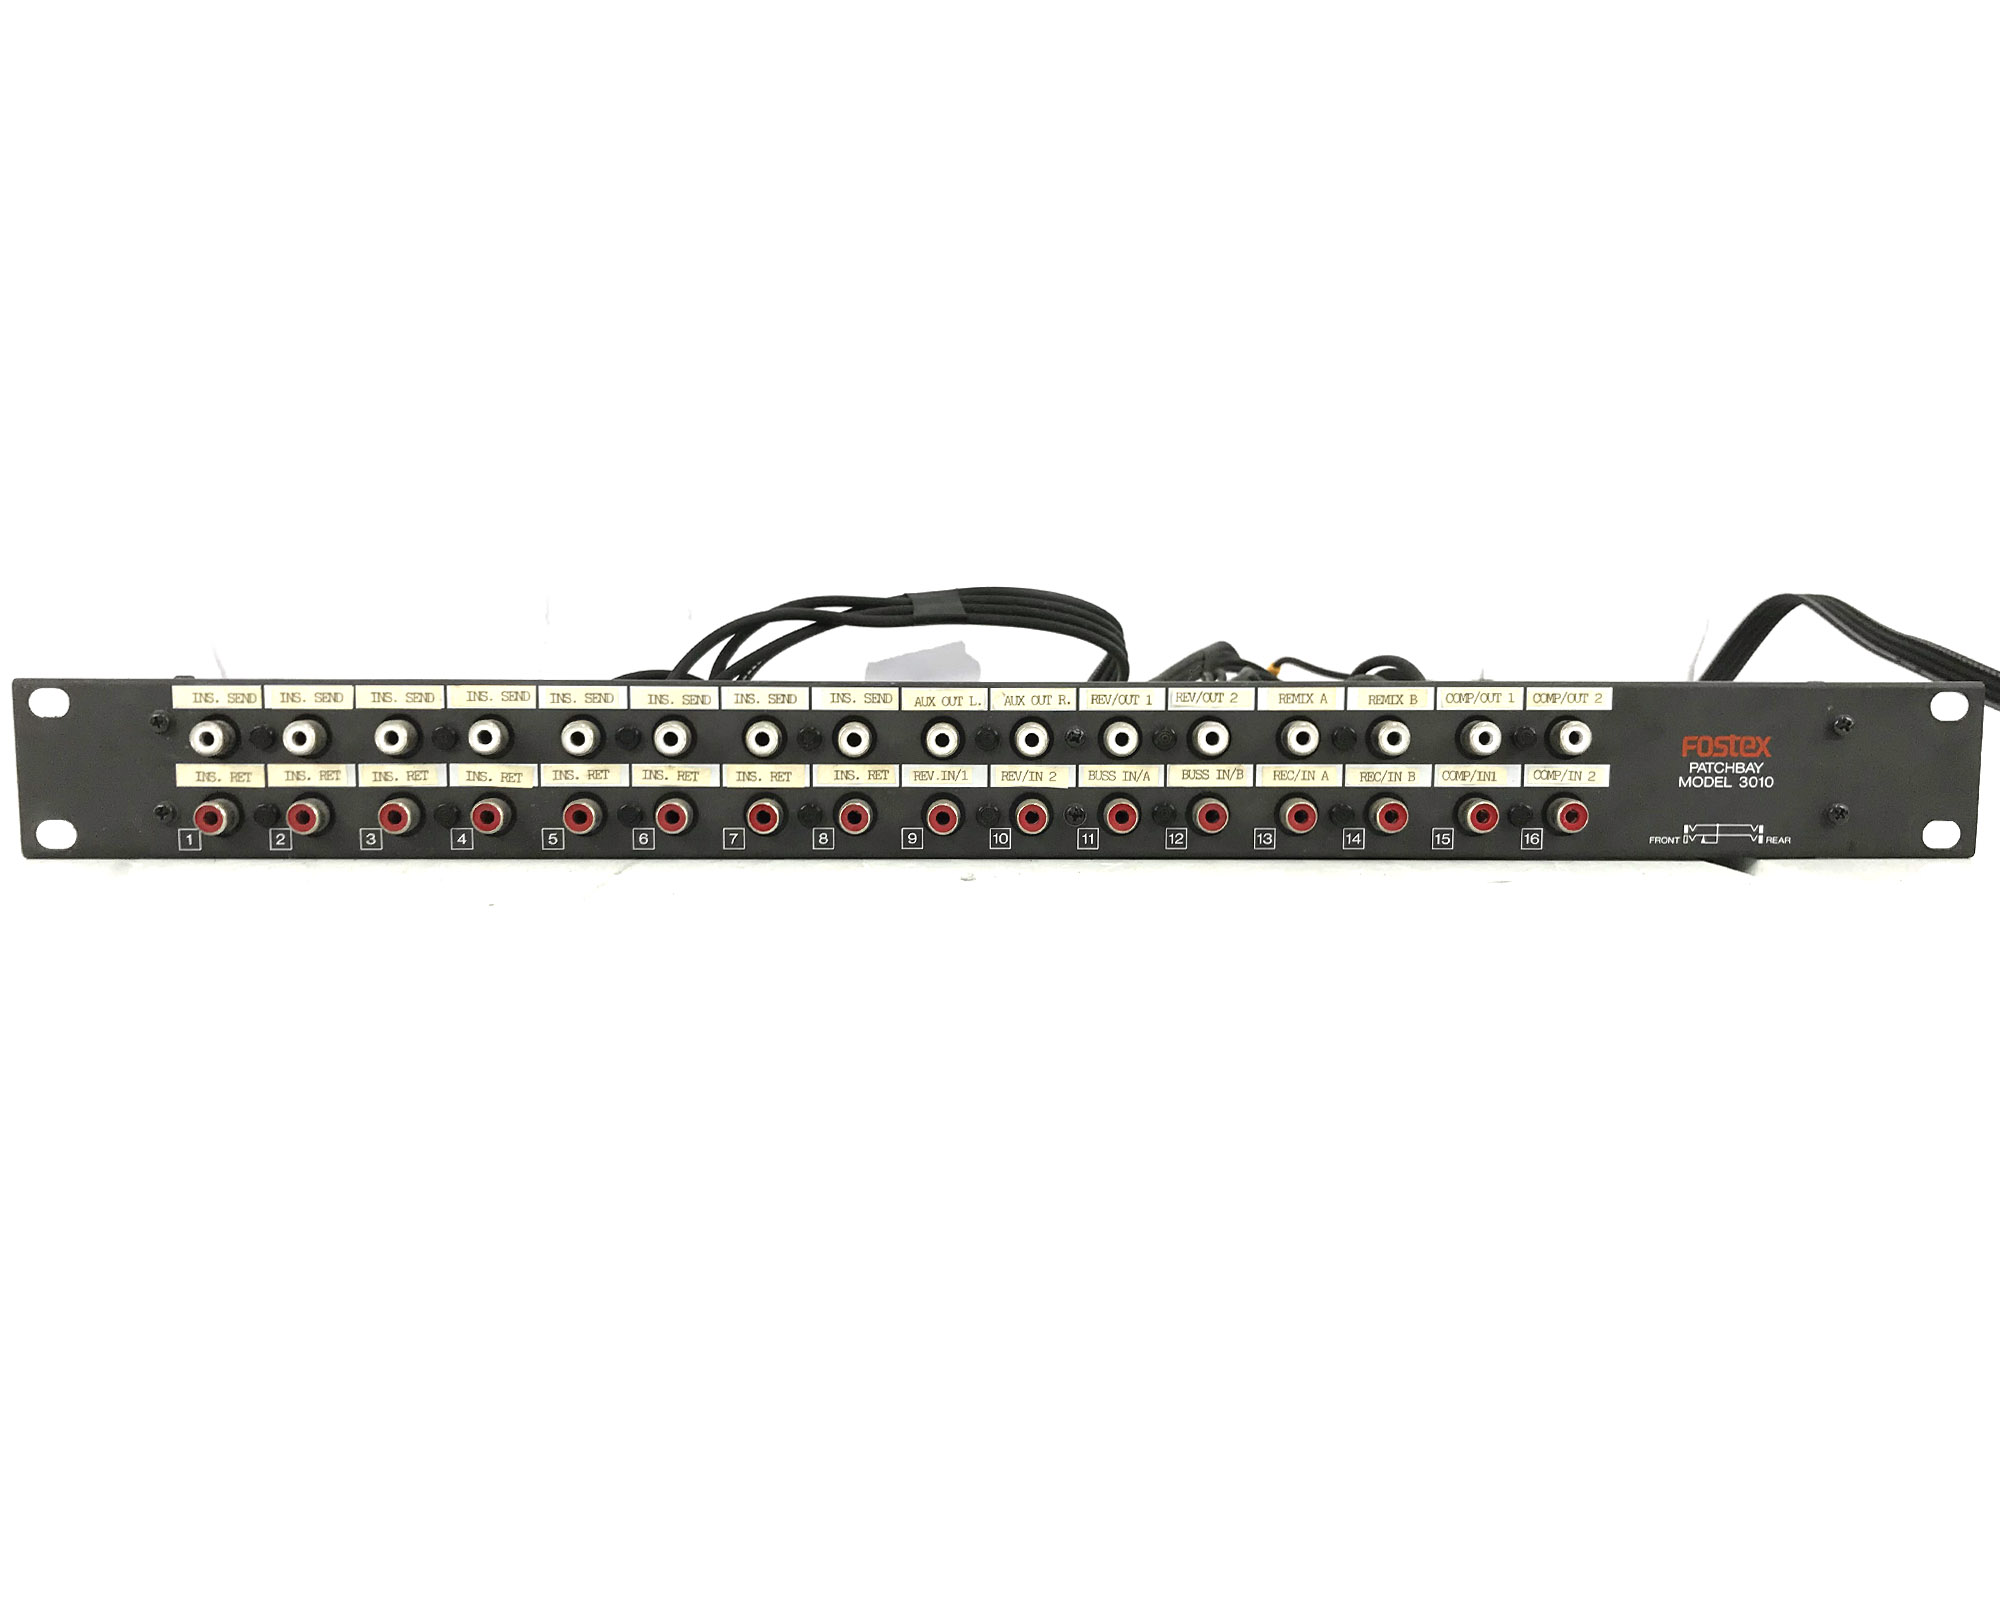 fostex patchbay model 3010 frontale